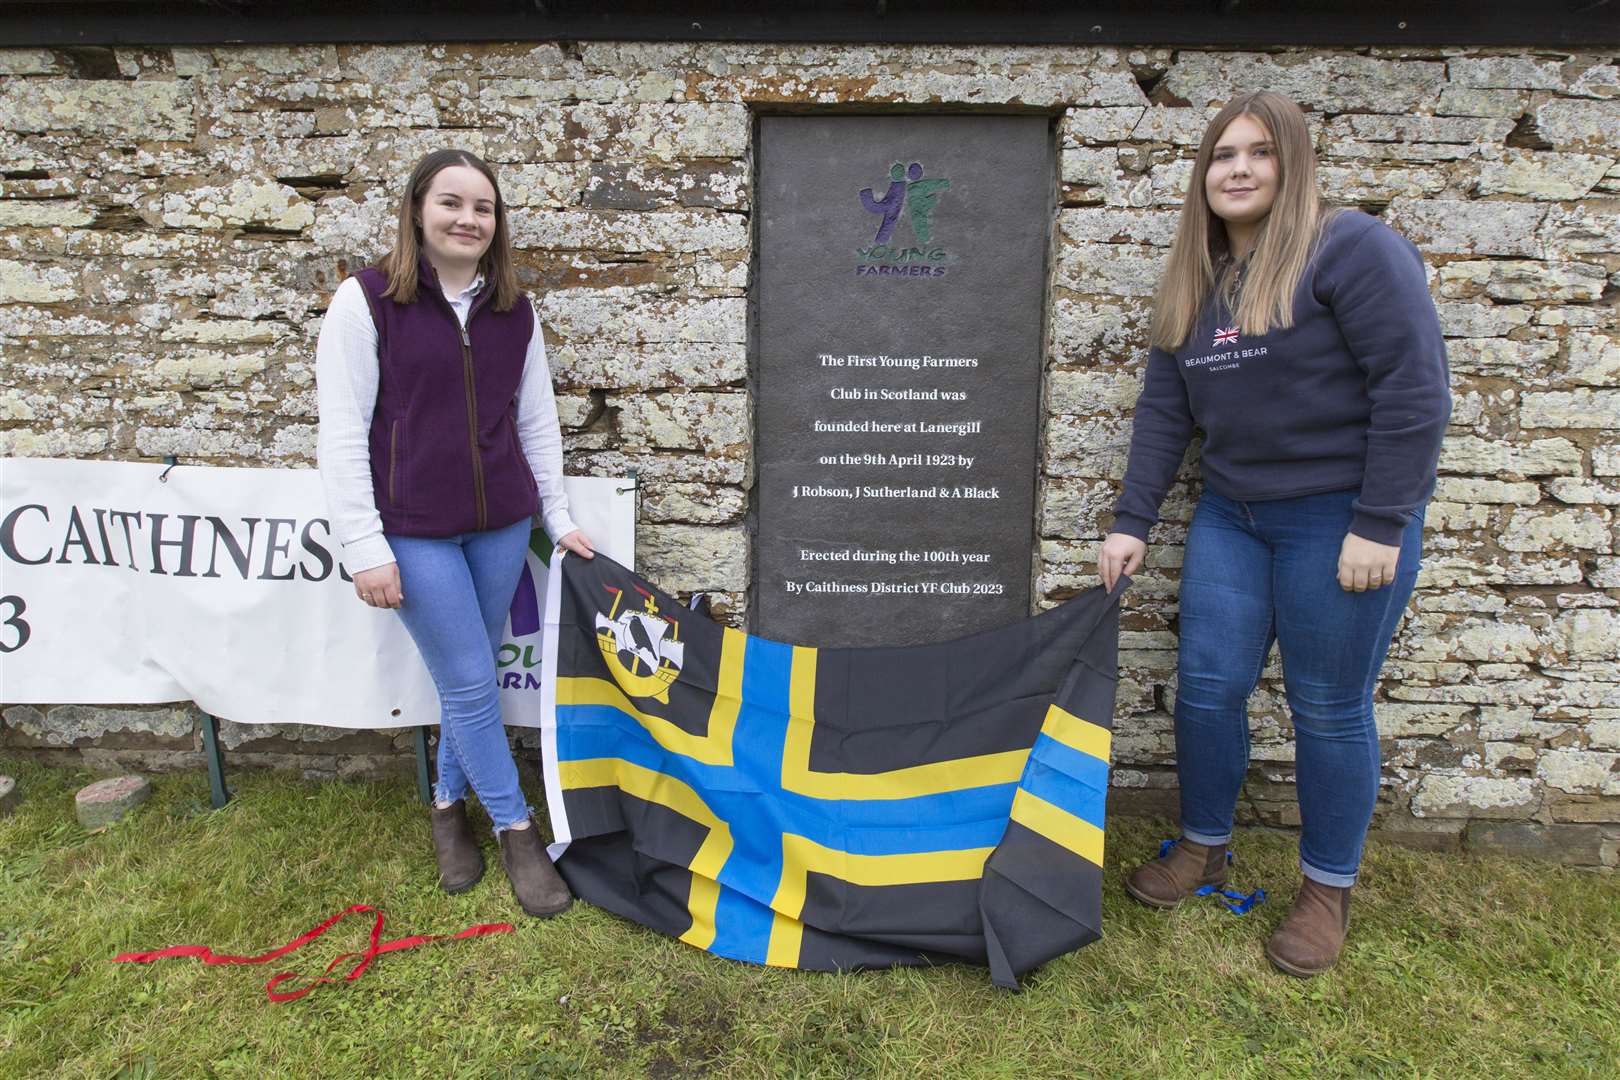 The Young Farmers' commemorative stone was unveiled by Iona Campbell (left), of Bower Young Farmers, and Alana Ross, from the Forss club. Picture: Robert MacDonald / Northern Studios